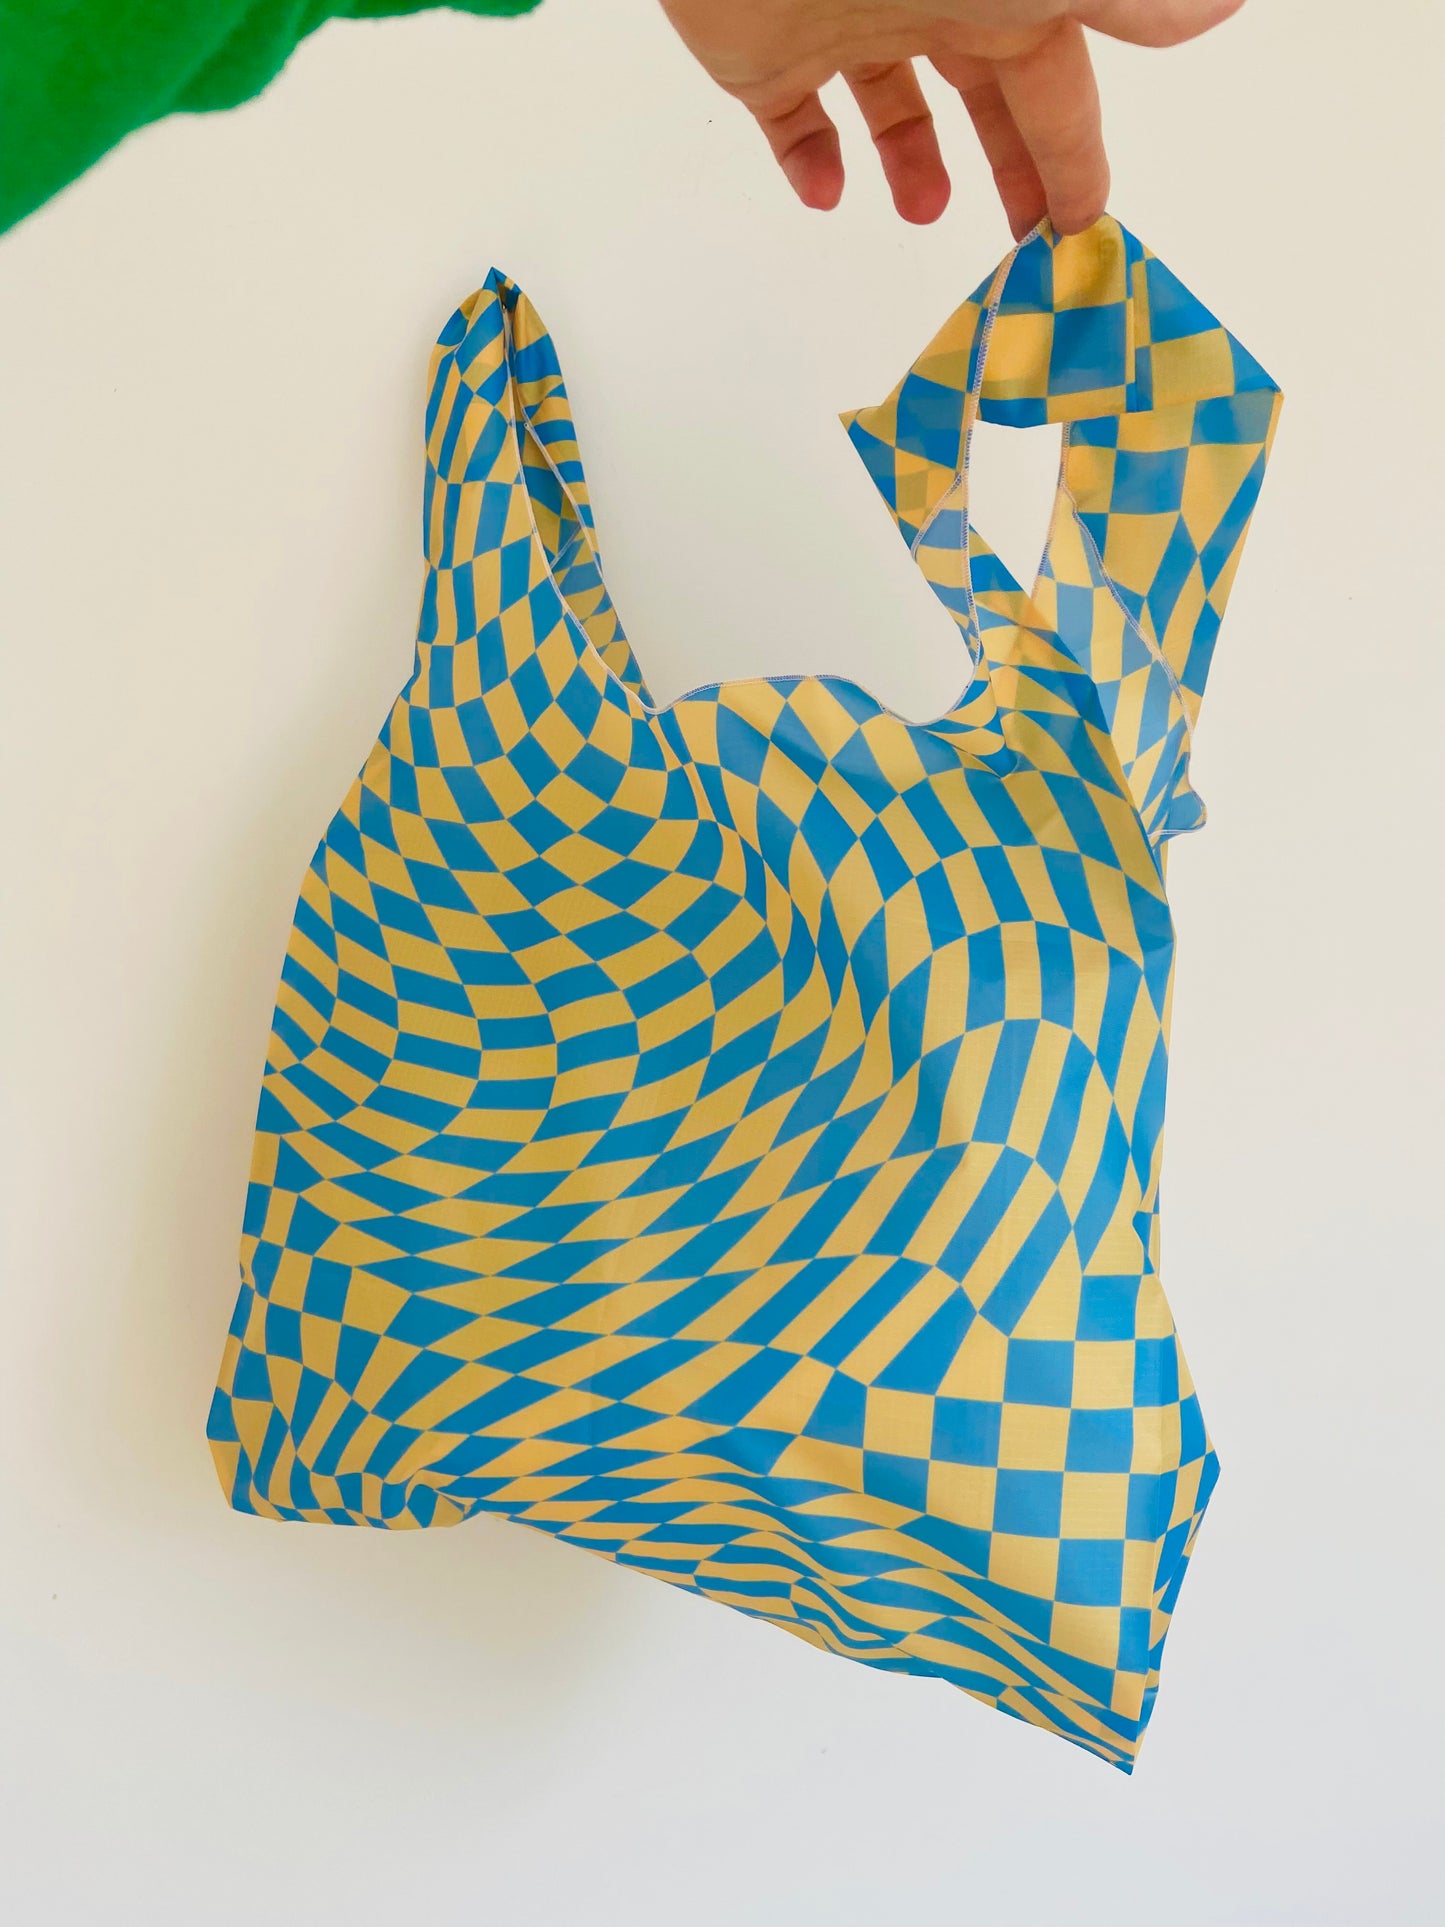 Checkered Parachute All Over Print Shopper Bag in Blue and Yellow